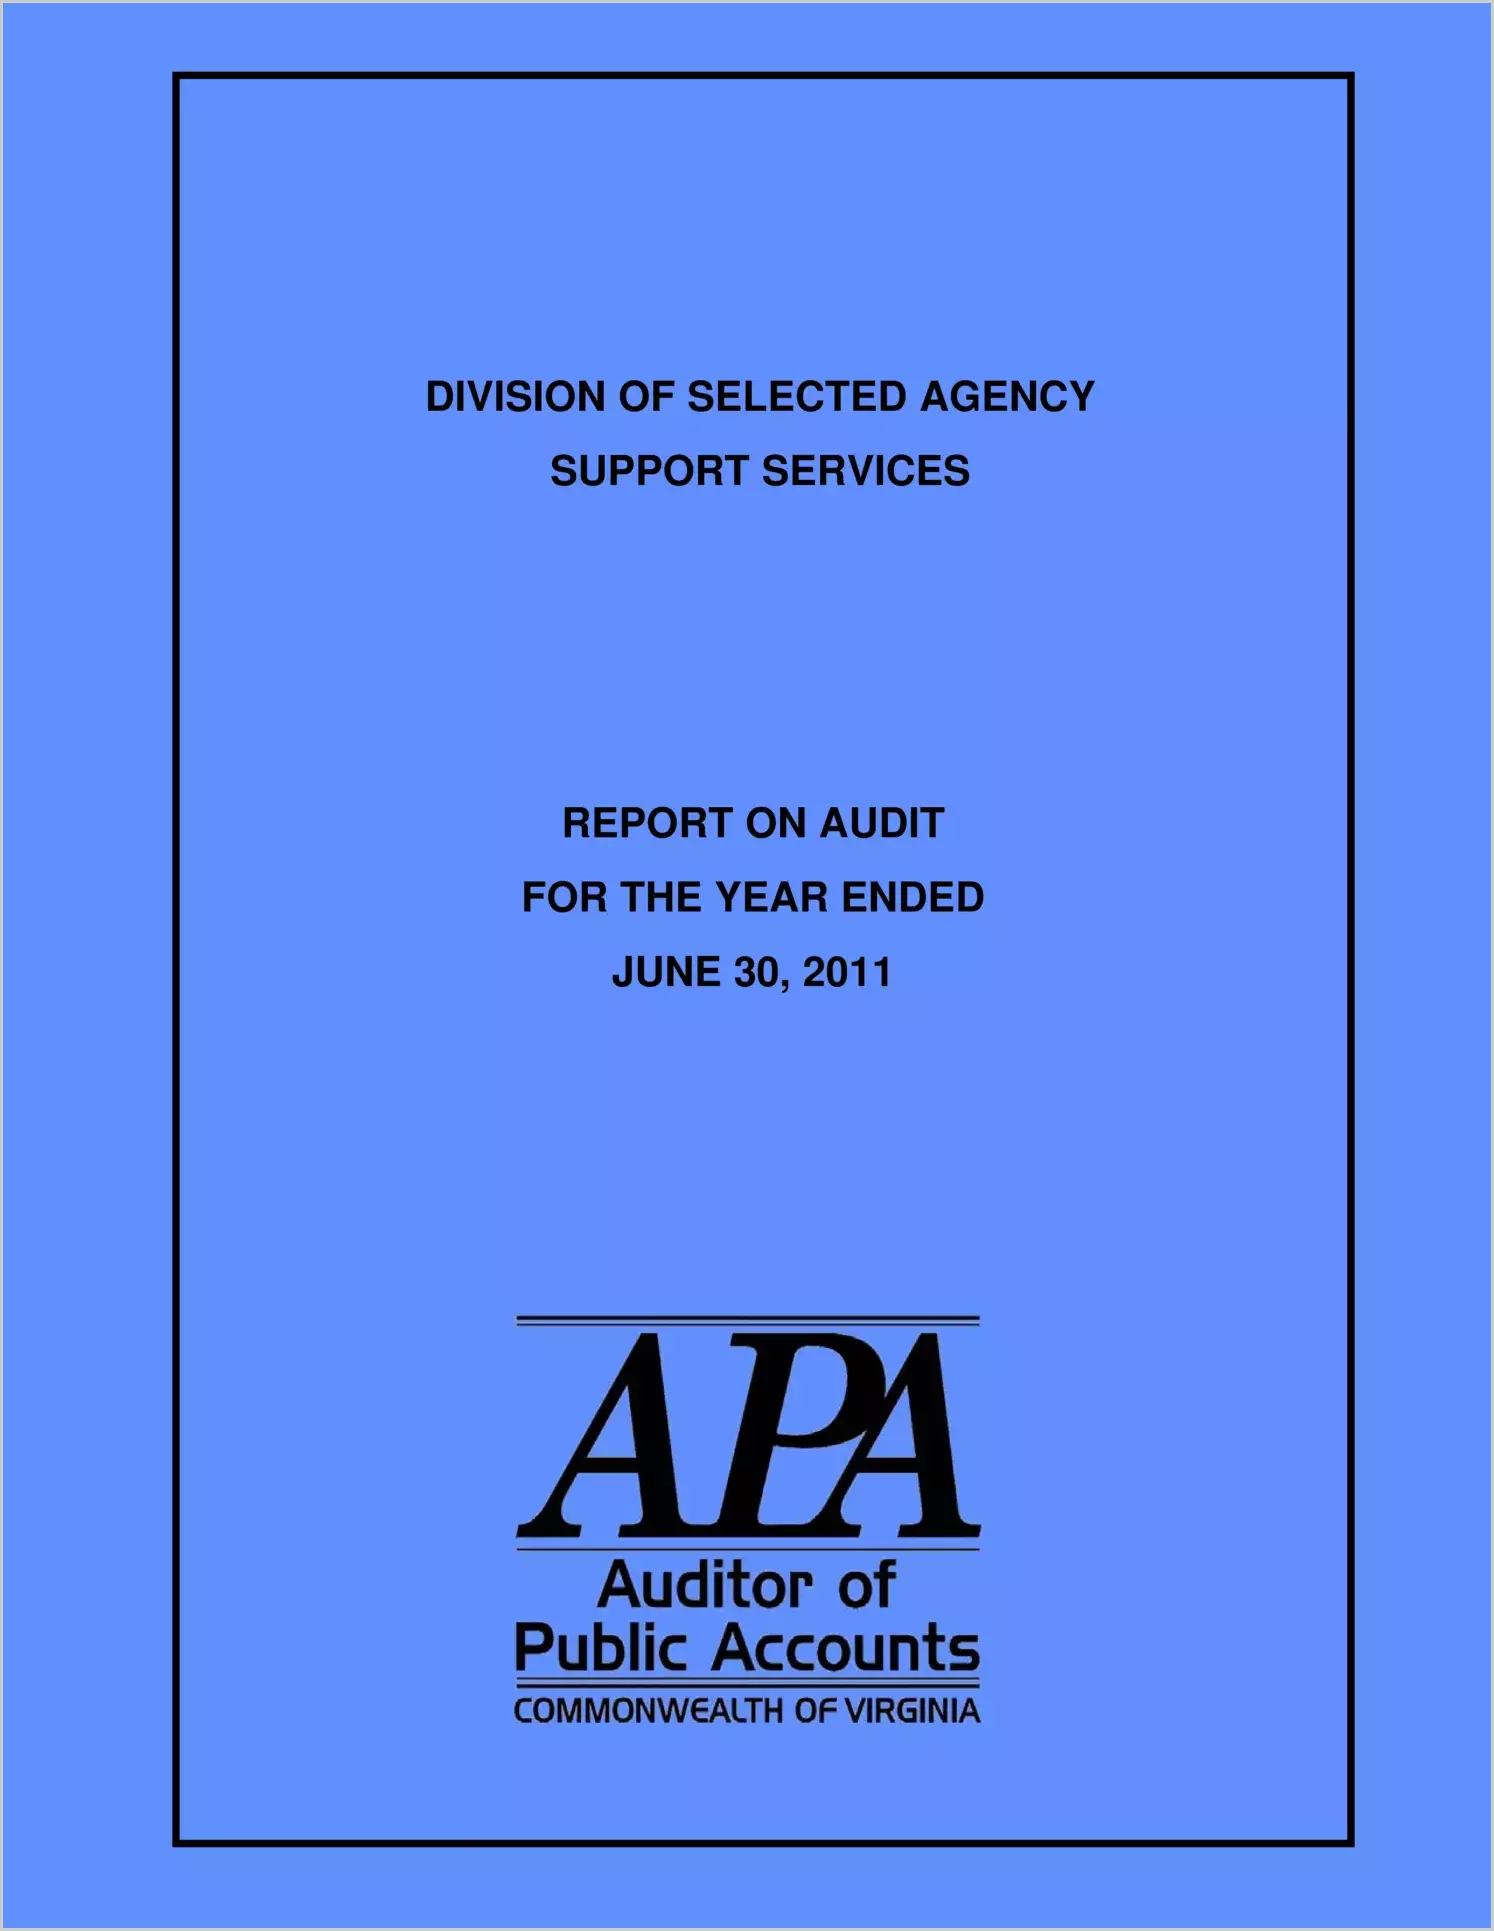 Division of Selected Agency Support Services for the year ended June 30, 2011